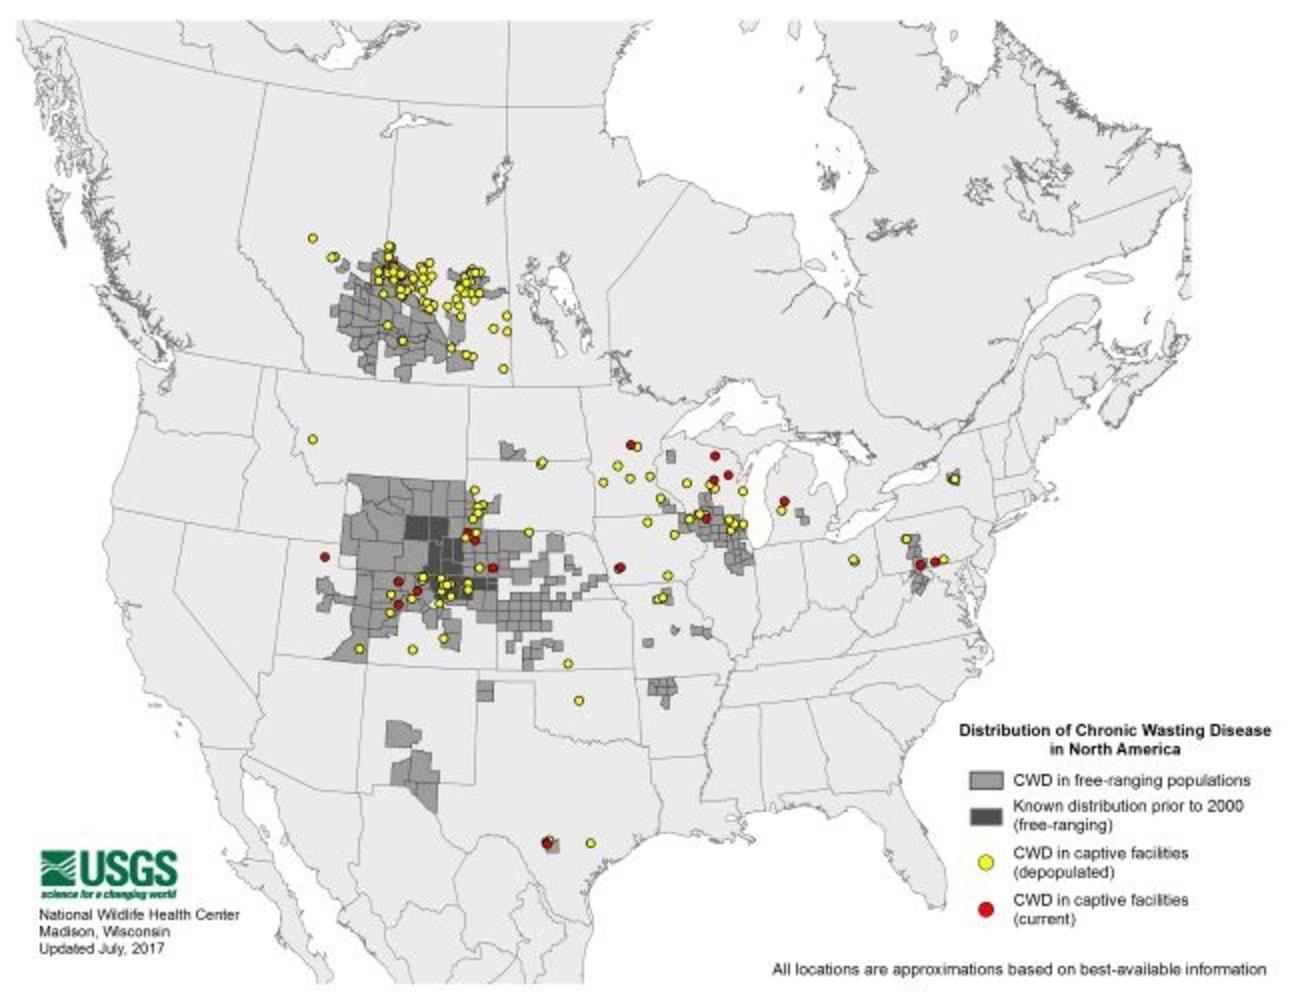 The Greater Yellowstone Ecosystem, along with Montana and Idaho, are said to be free of Chronic Wasting Disease but for how long?  Some scientists say the deadly disease is already here. Map showing the progression of CWD in the U.S. and Canada courtesy U.S. Geological Survey's National Wildlife Health Center